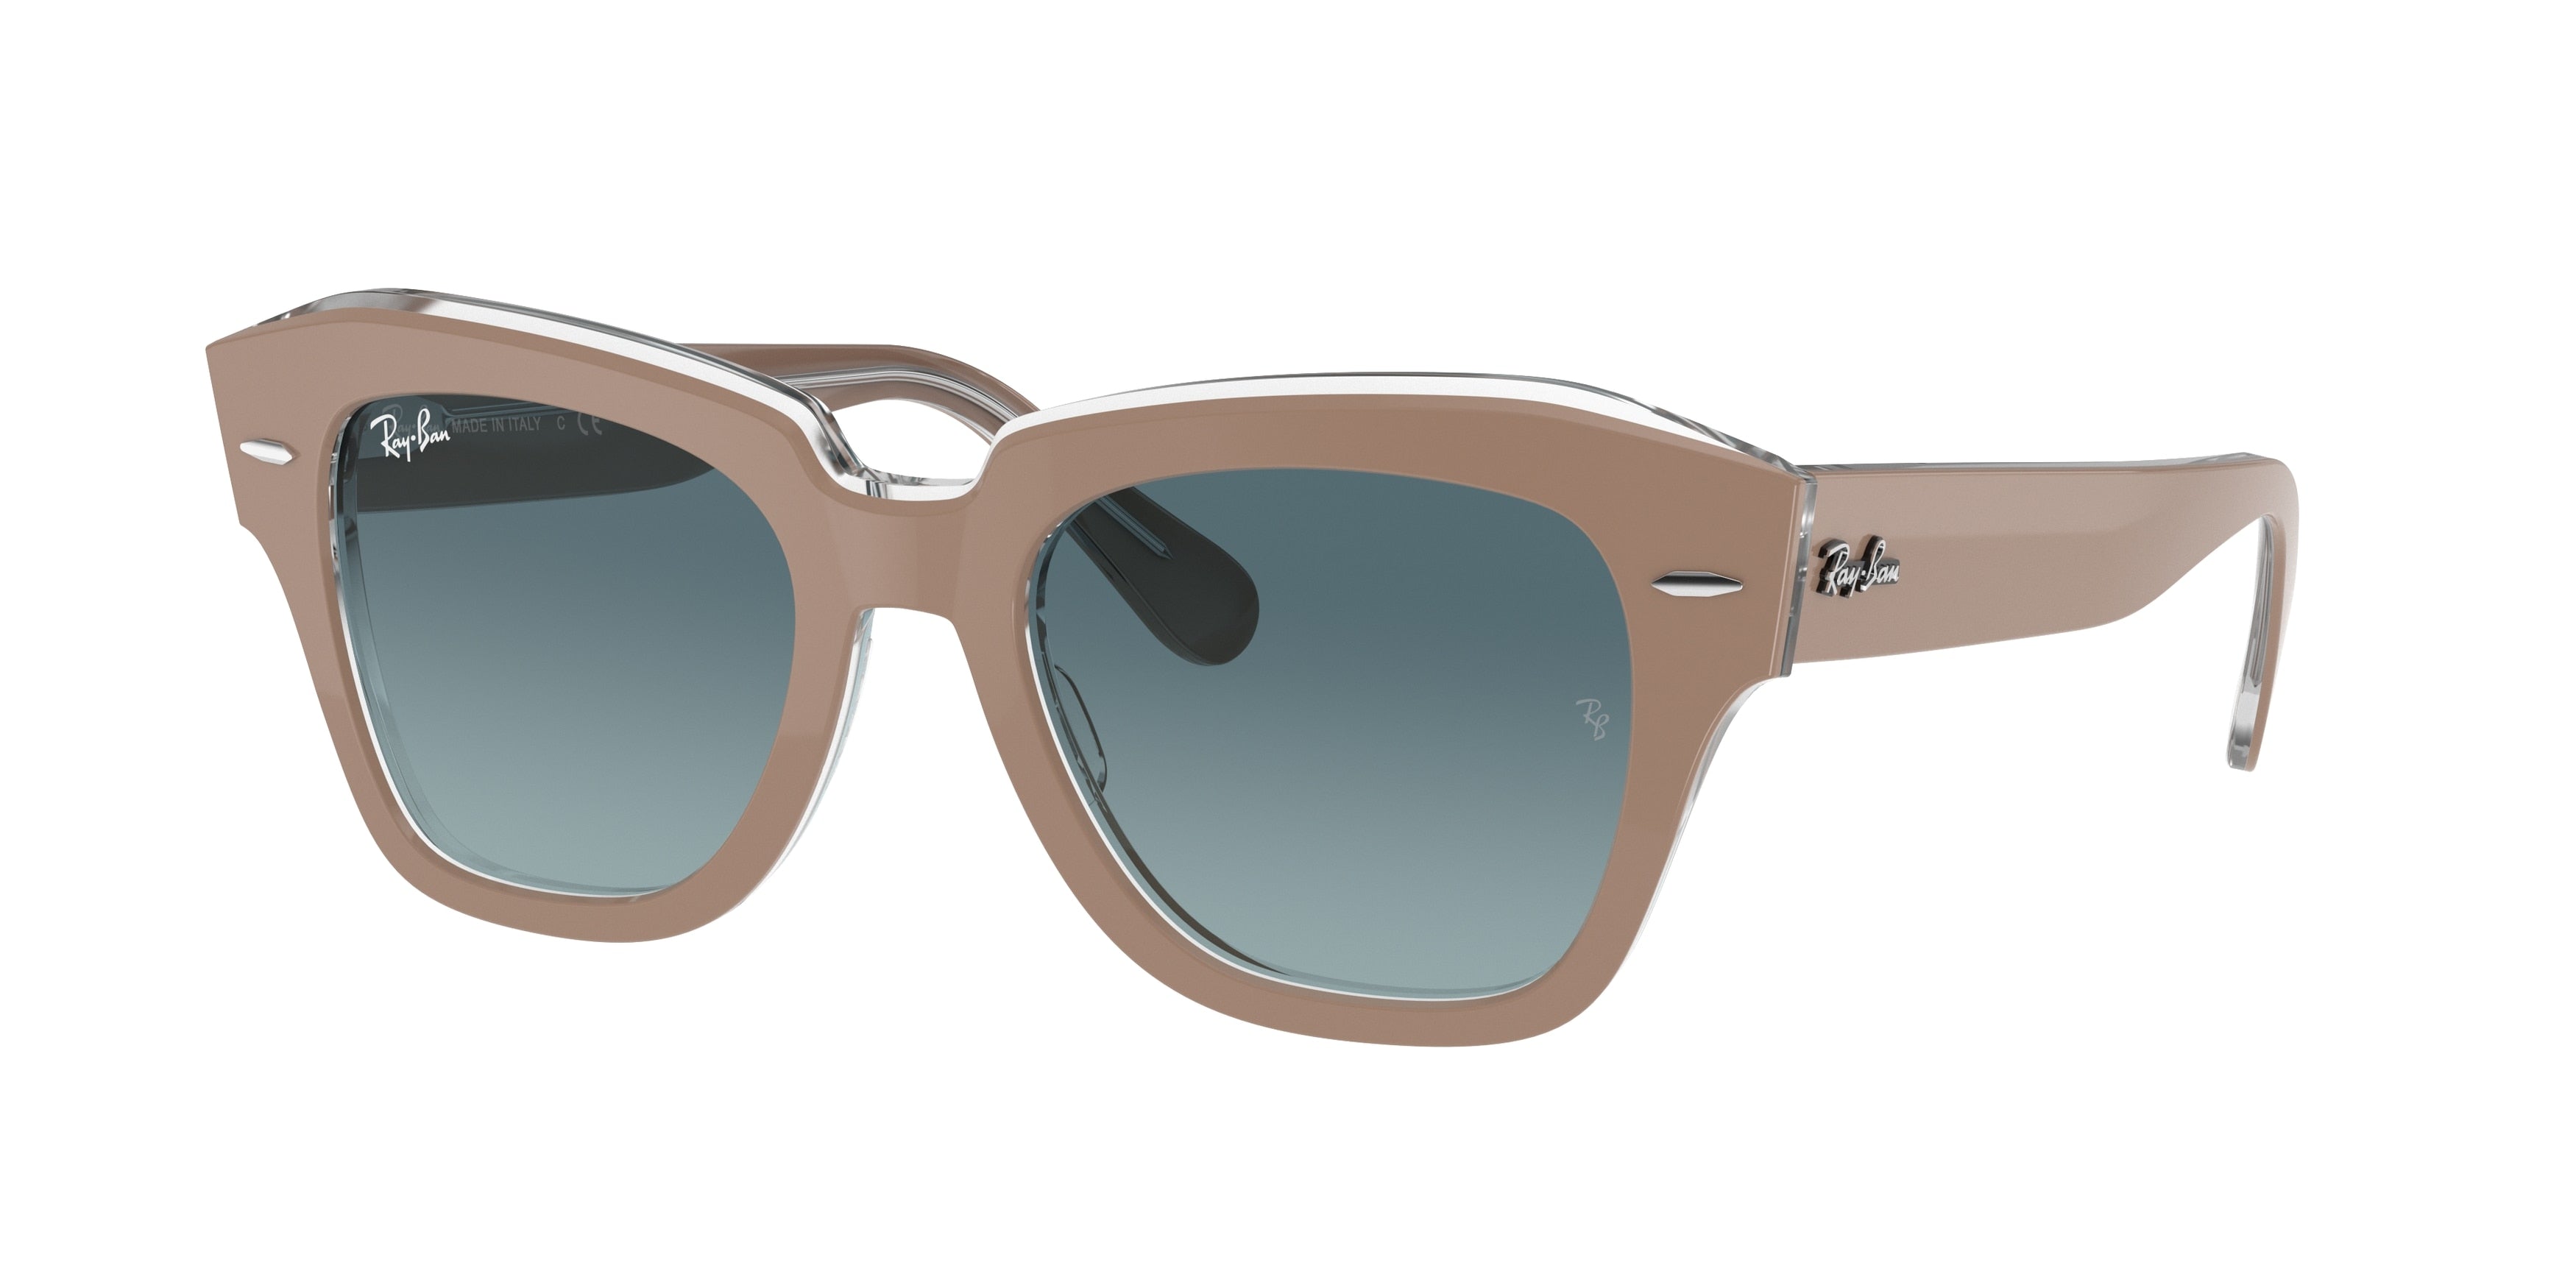 Ray-Ban STATE STREET RB2186 Square Sunglasses  12973M-Beige On Transparent 49-145-20 - Color Map Beige